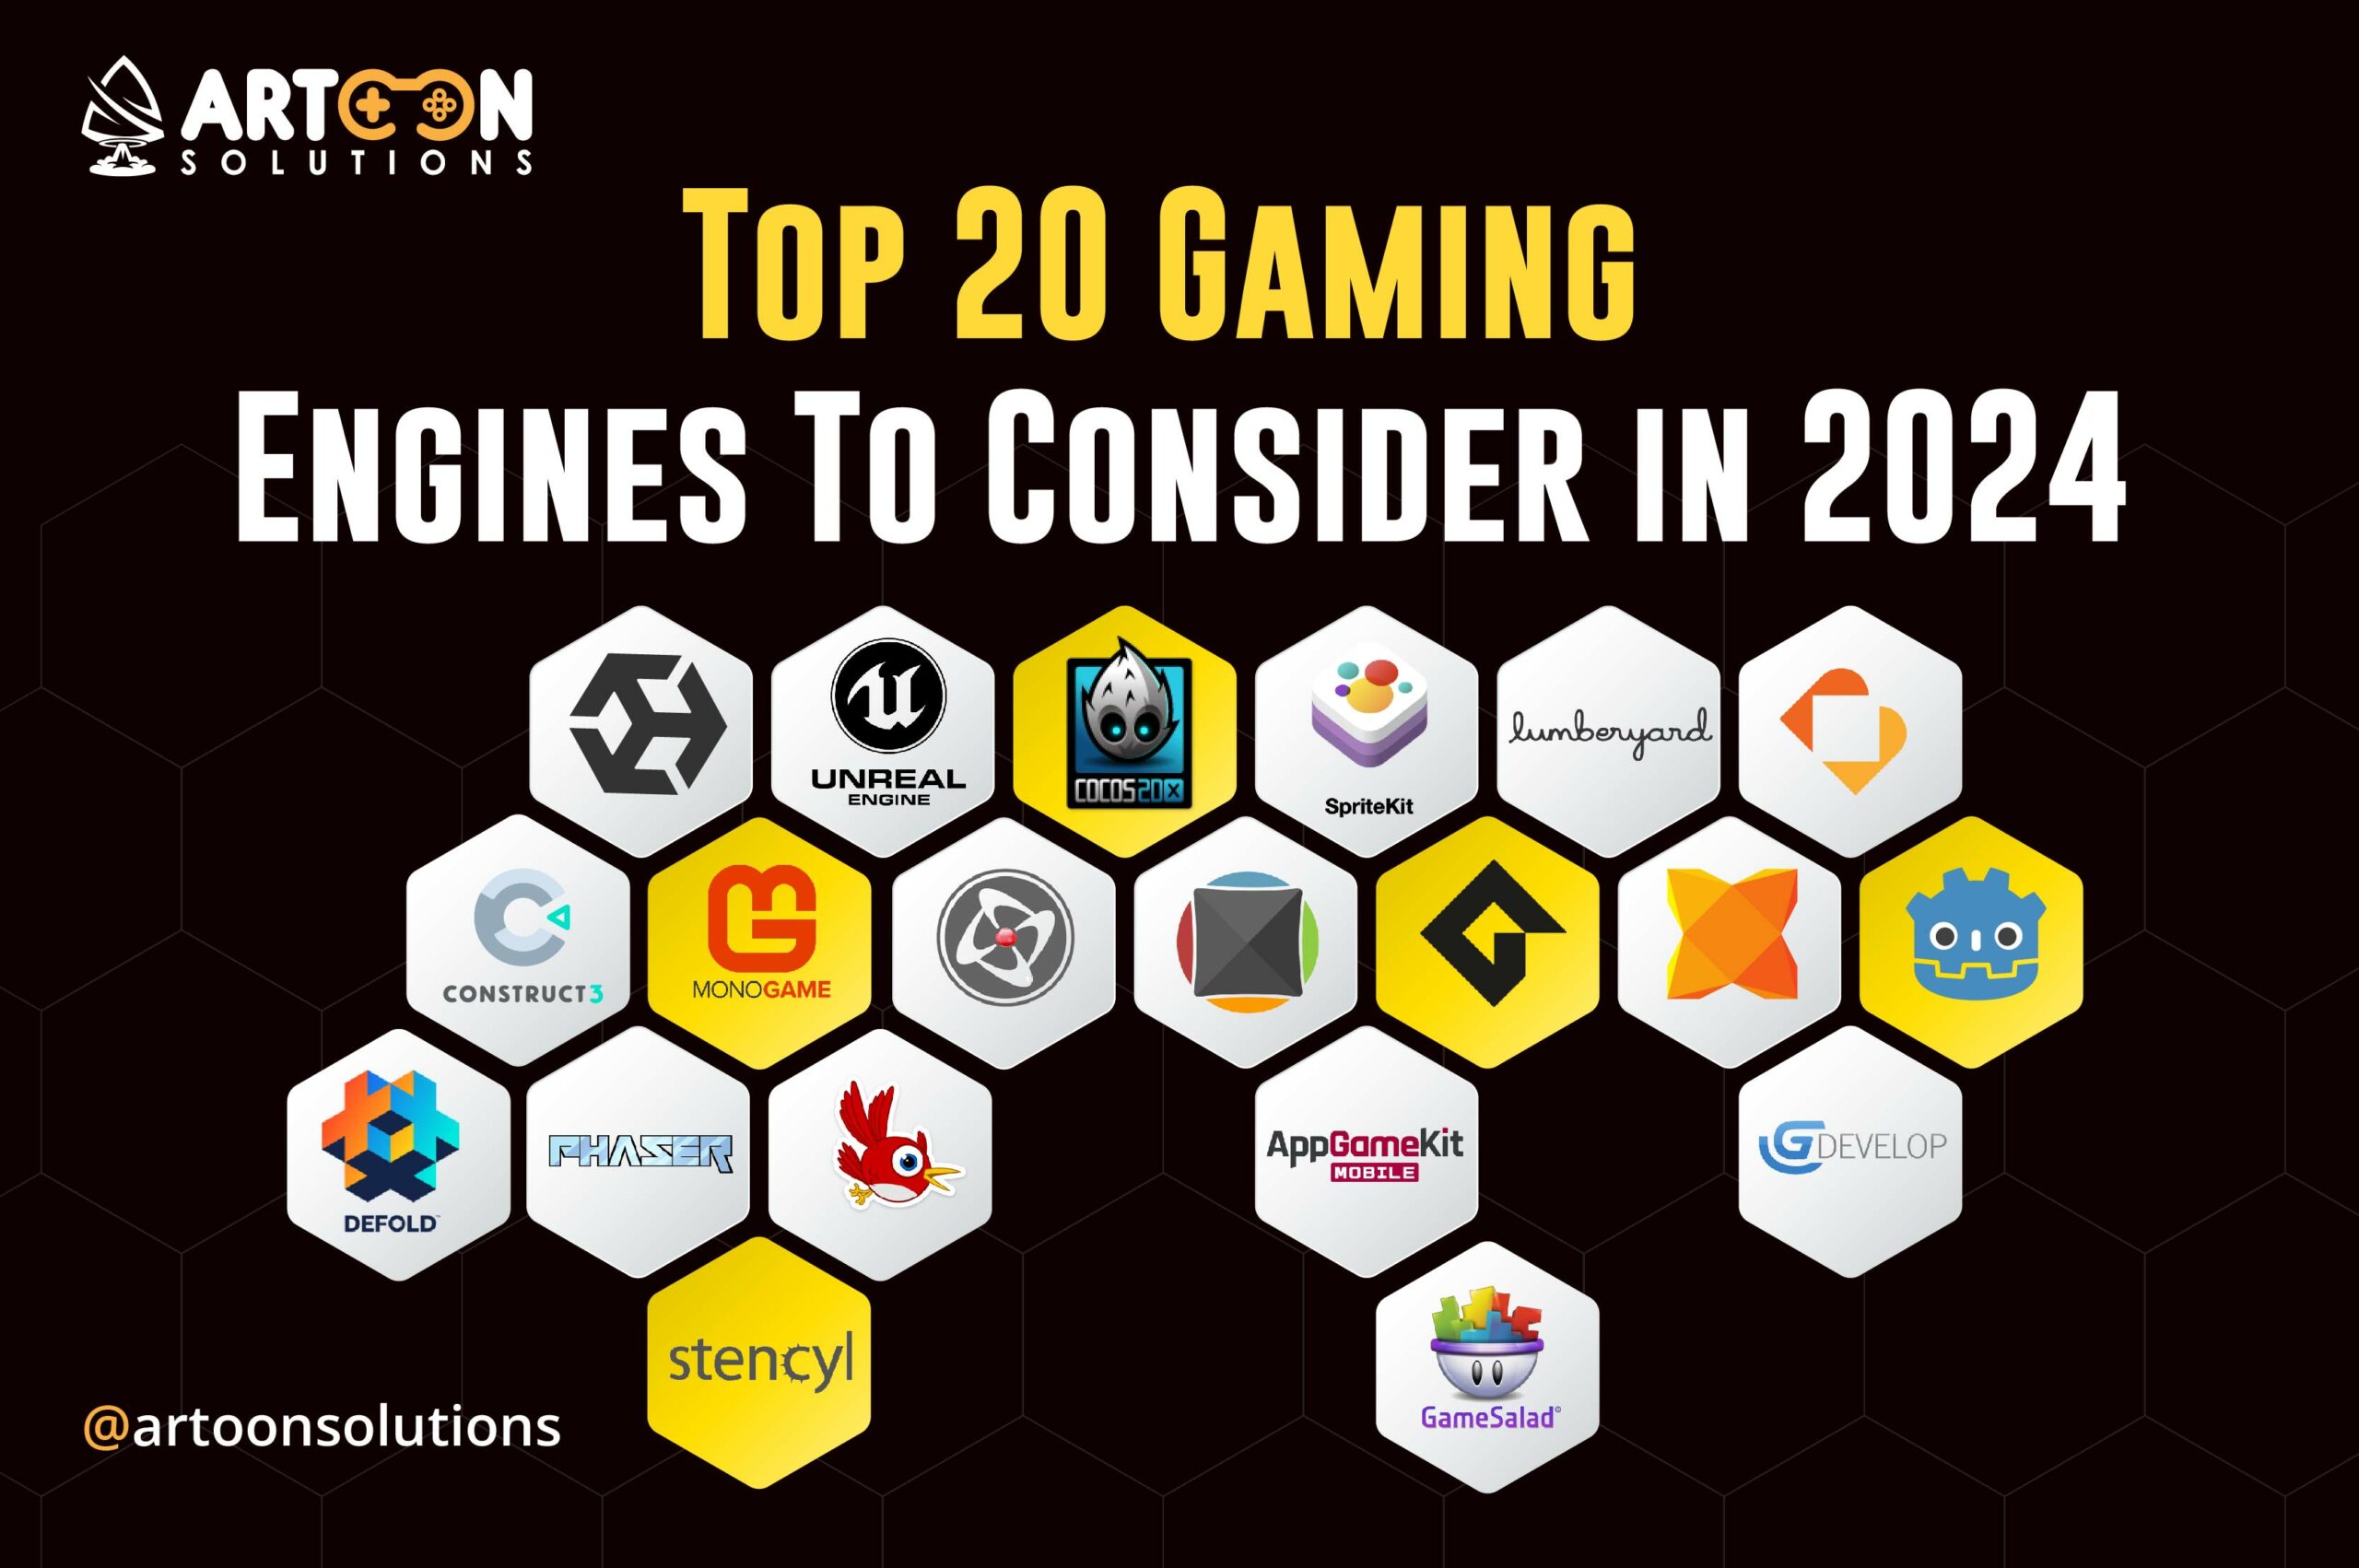 Top 20 Gaming Engines To Consider in 2024